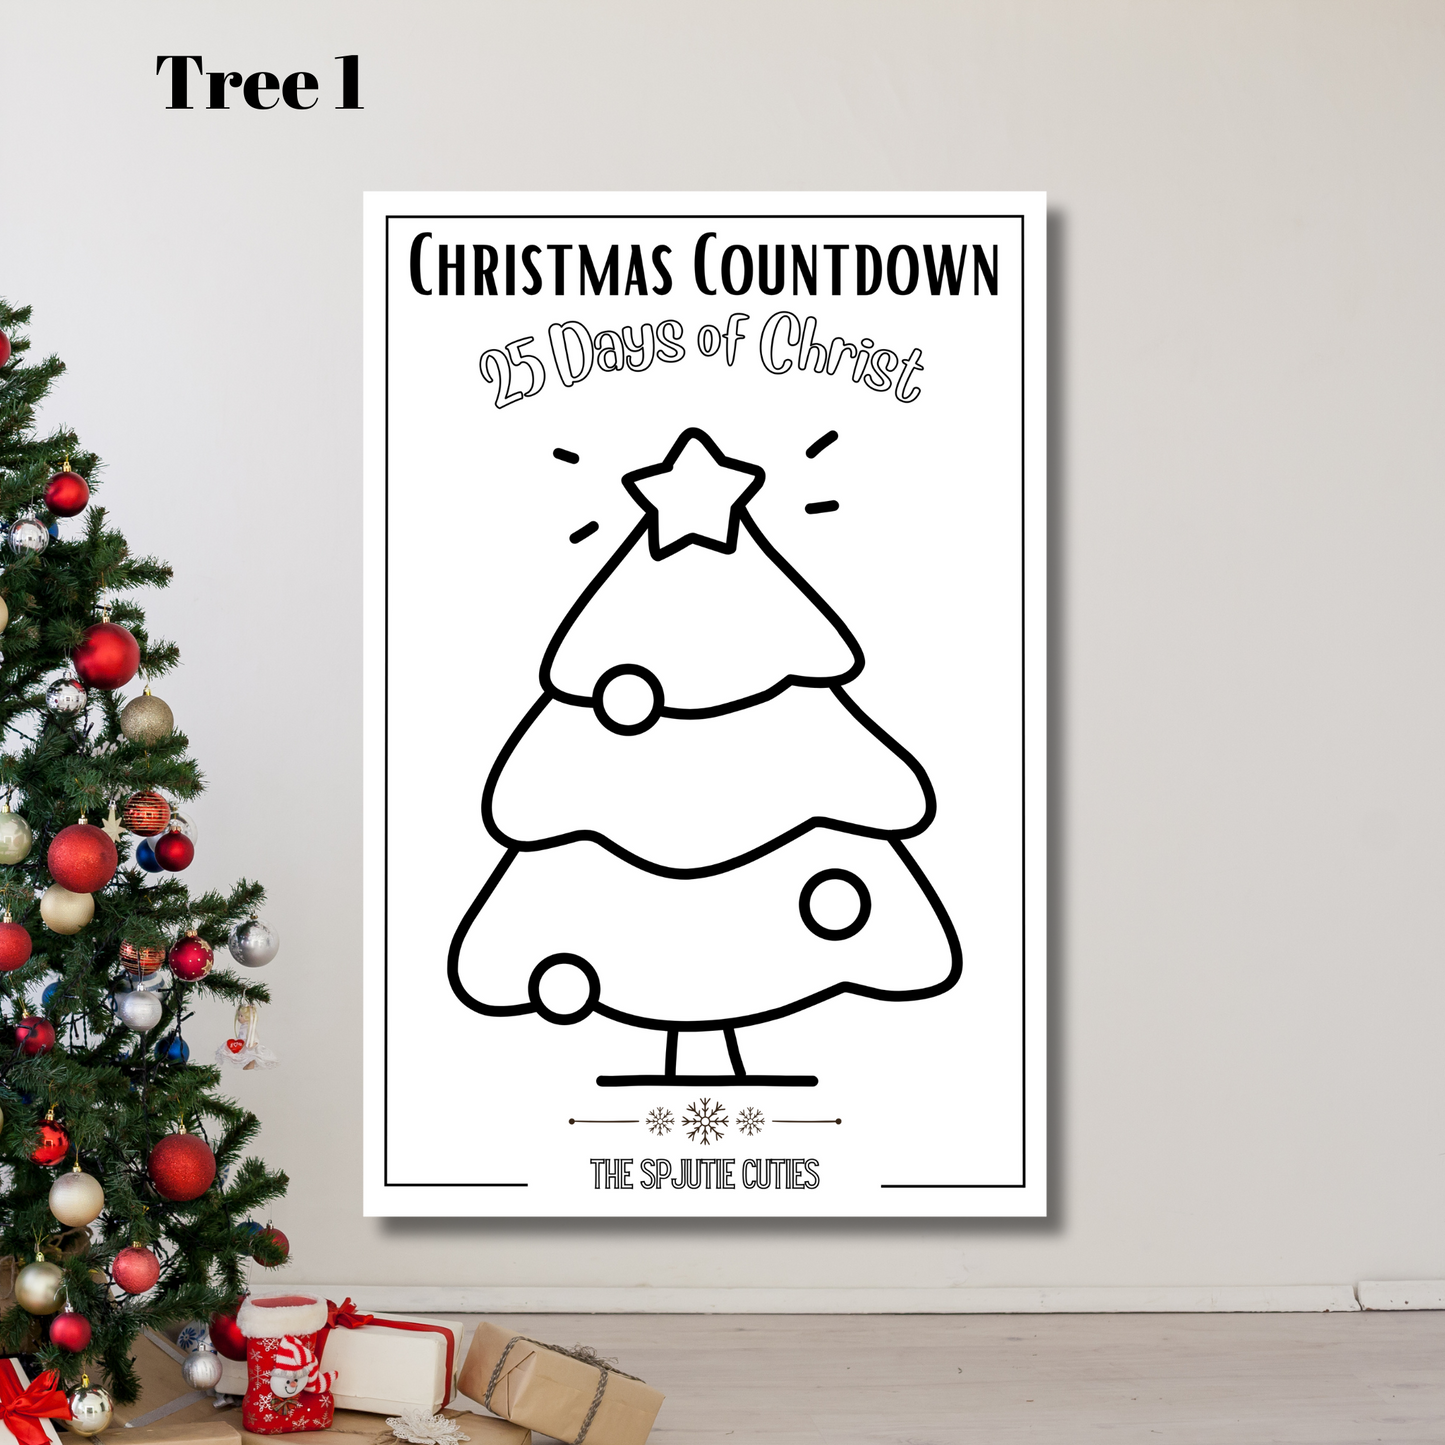 25 Days of Christ | Christmas Coloring Advent Poster